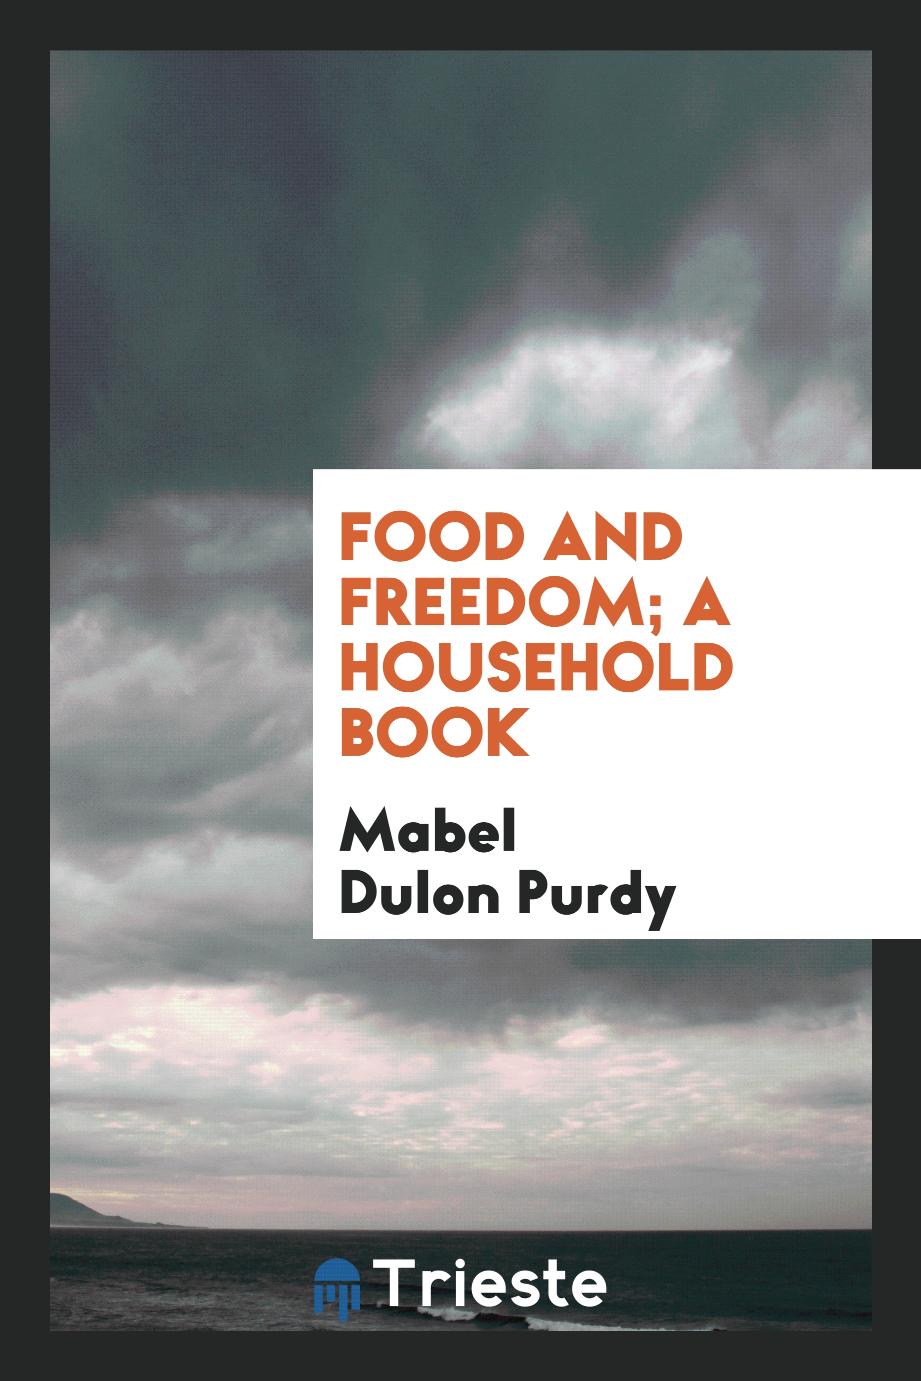 Food and freedom; a household book